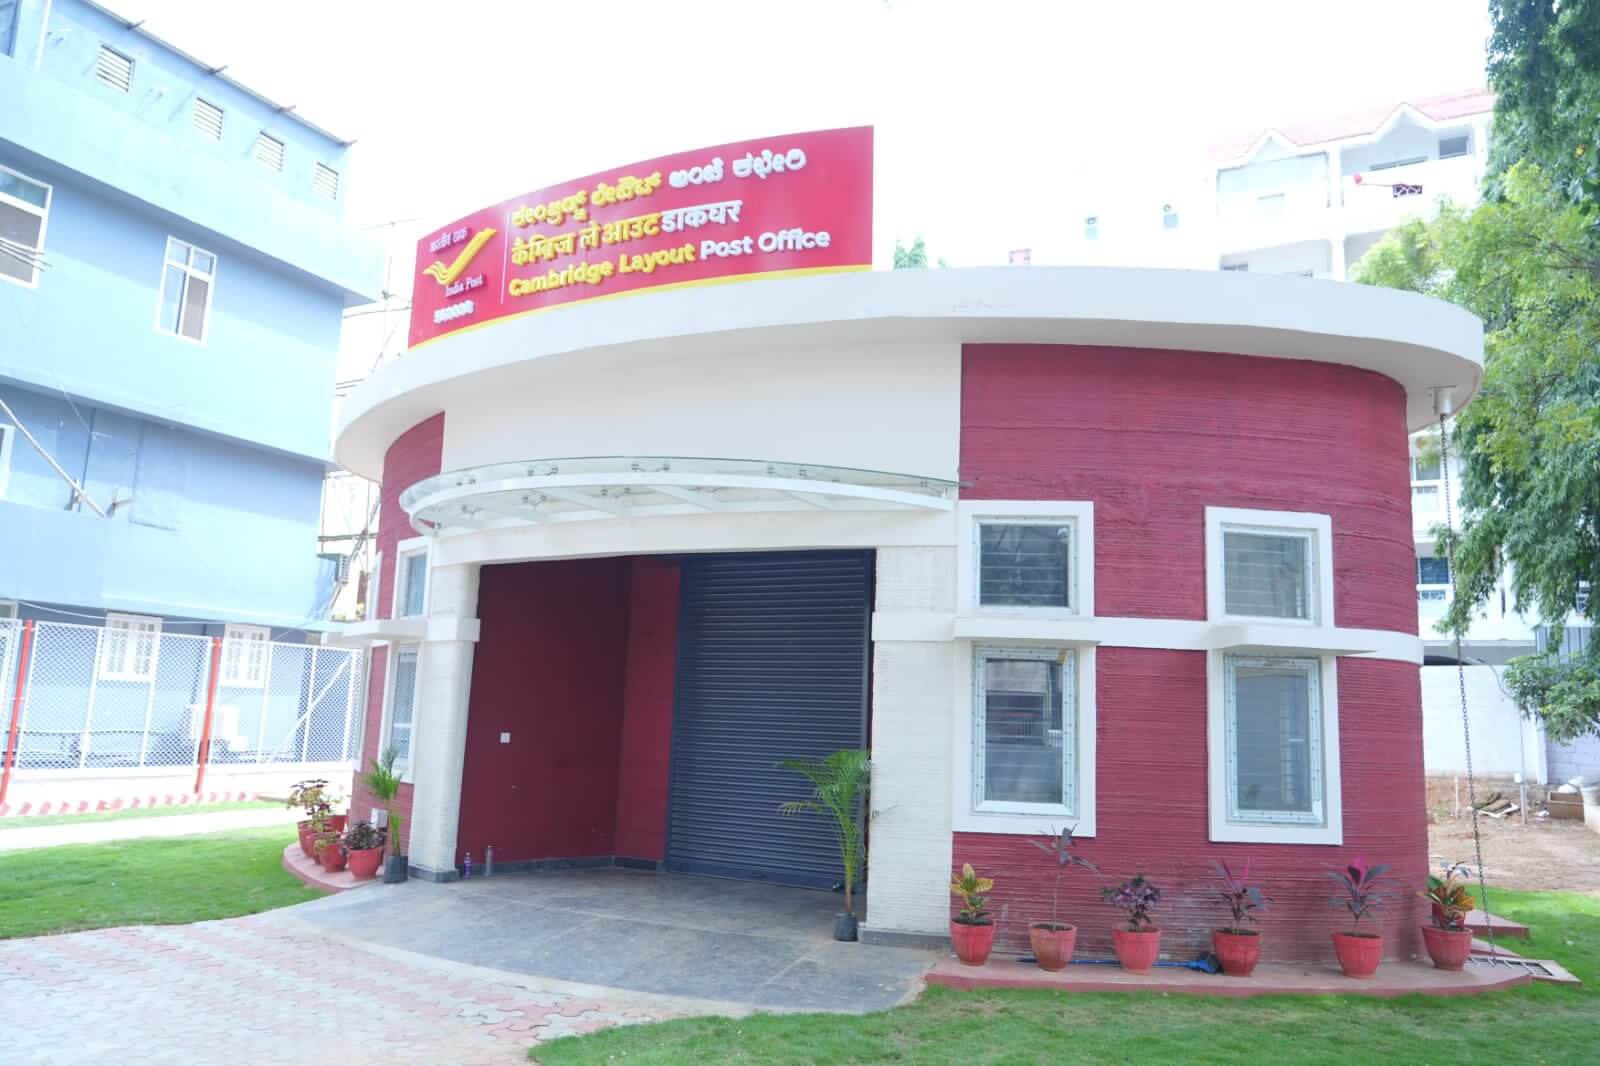 India's First 3D Printed Post Office (Front) in Bengaluru